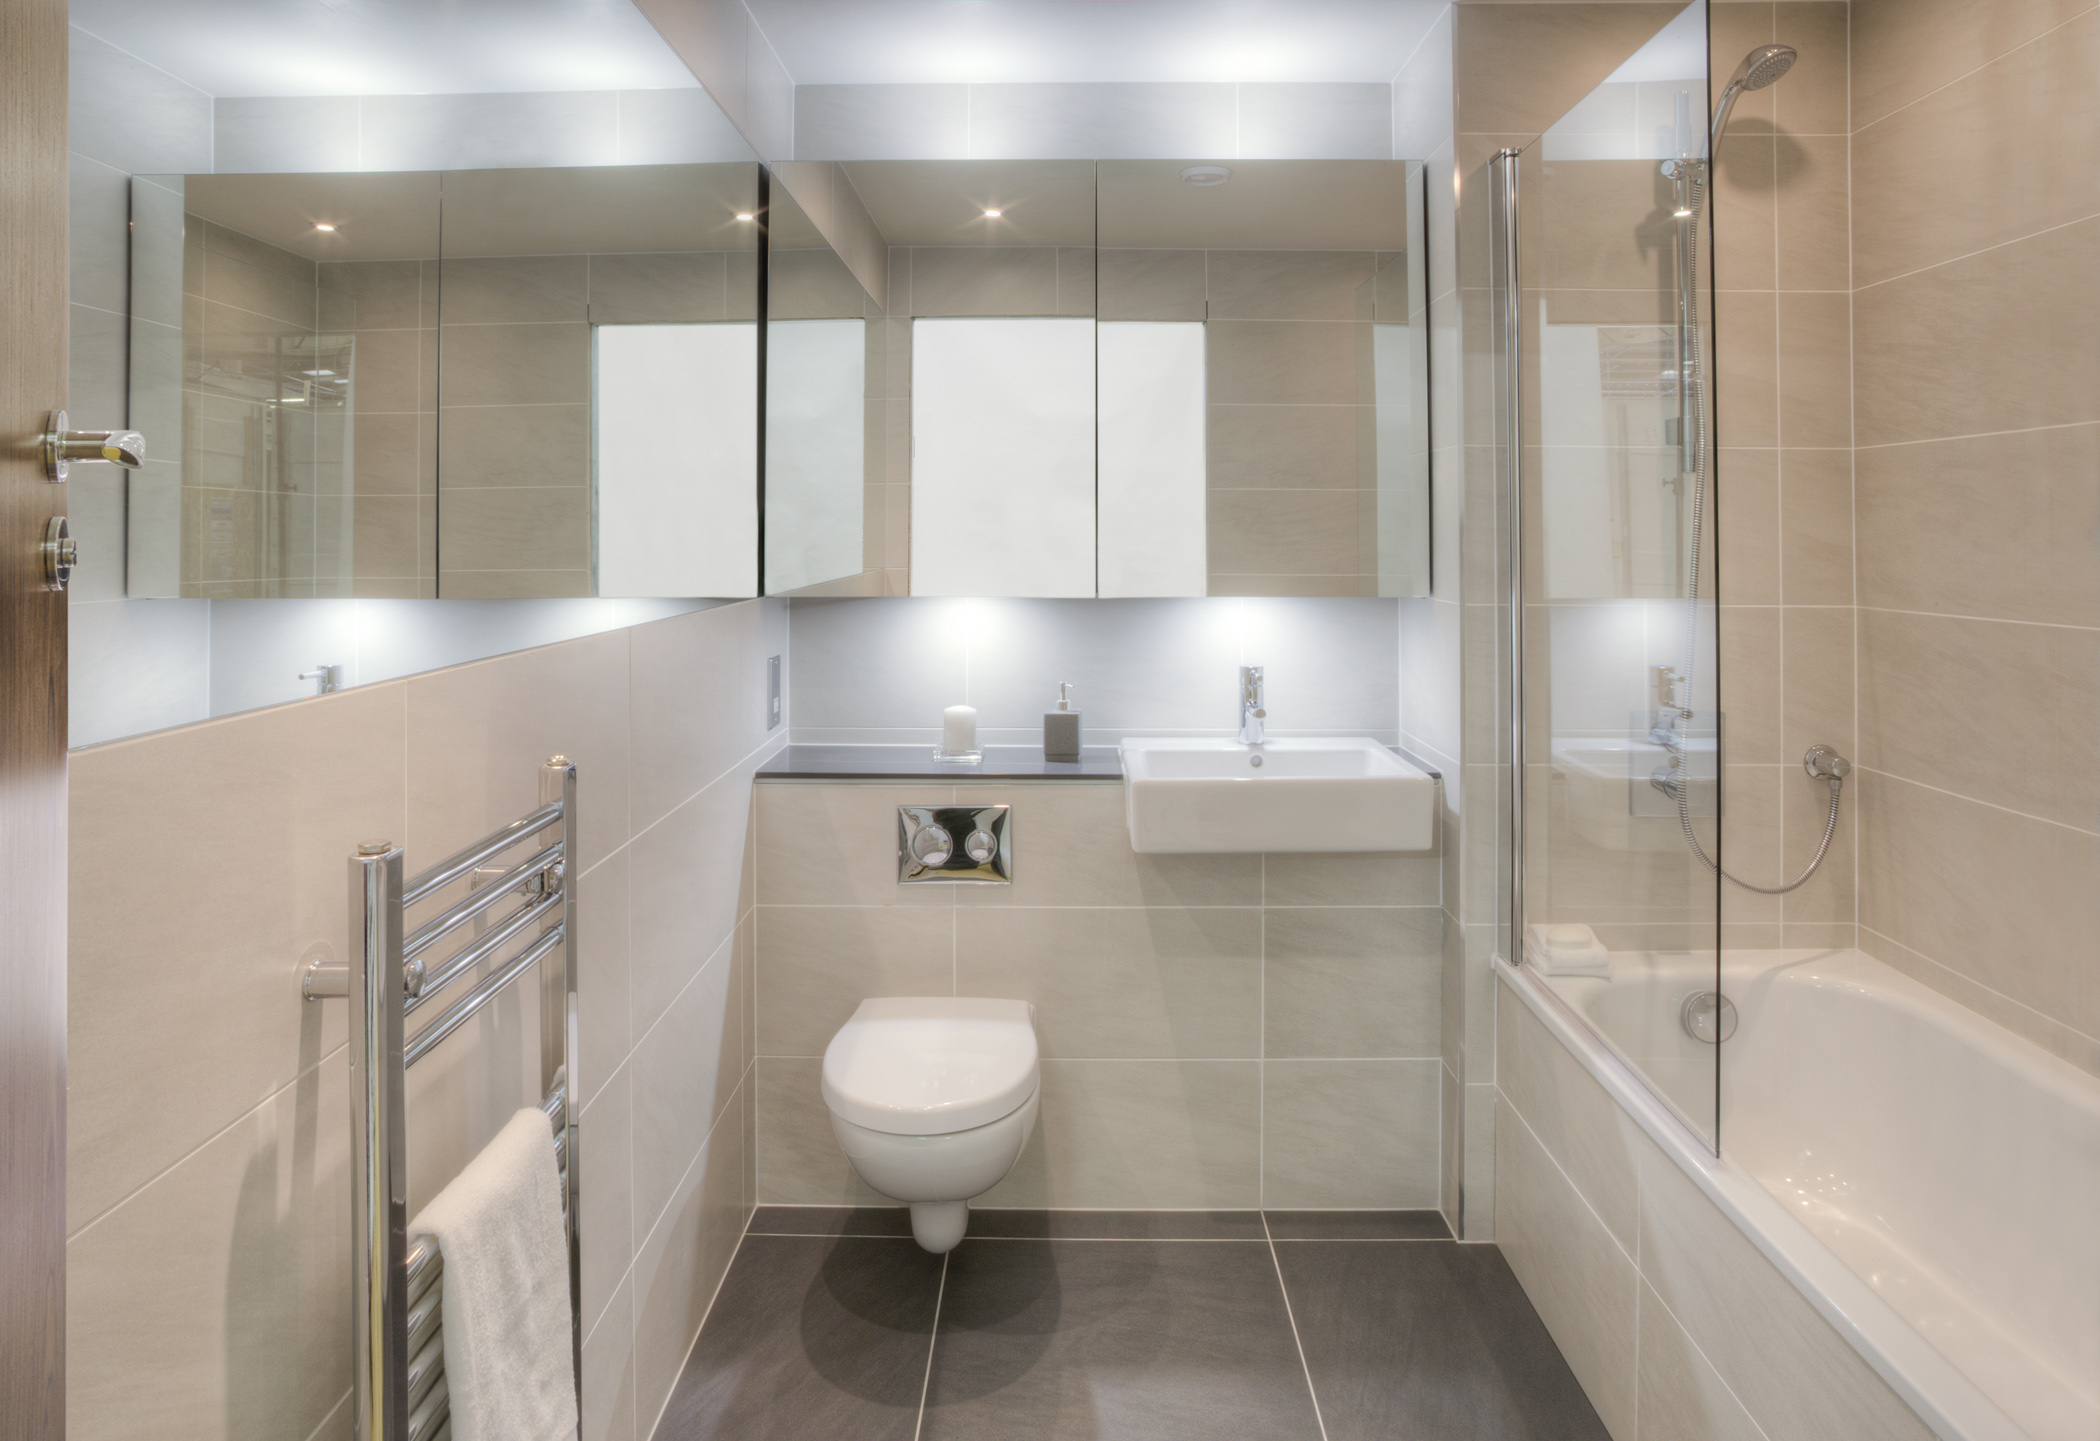 Offsite Solutions launches RIBA-accredited CPD for bathroom pods